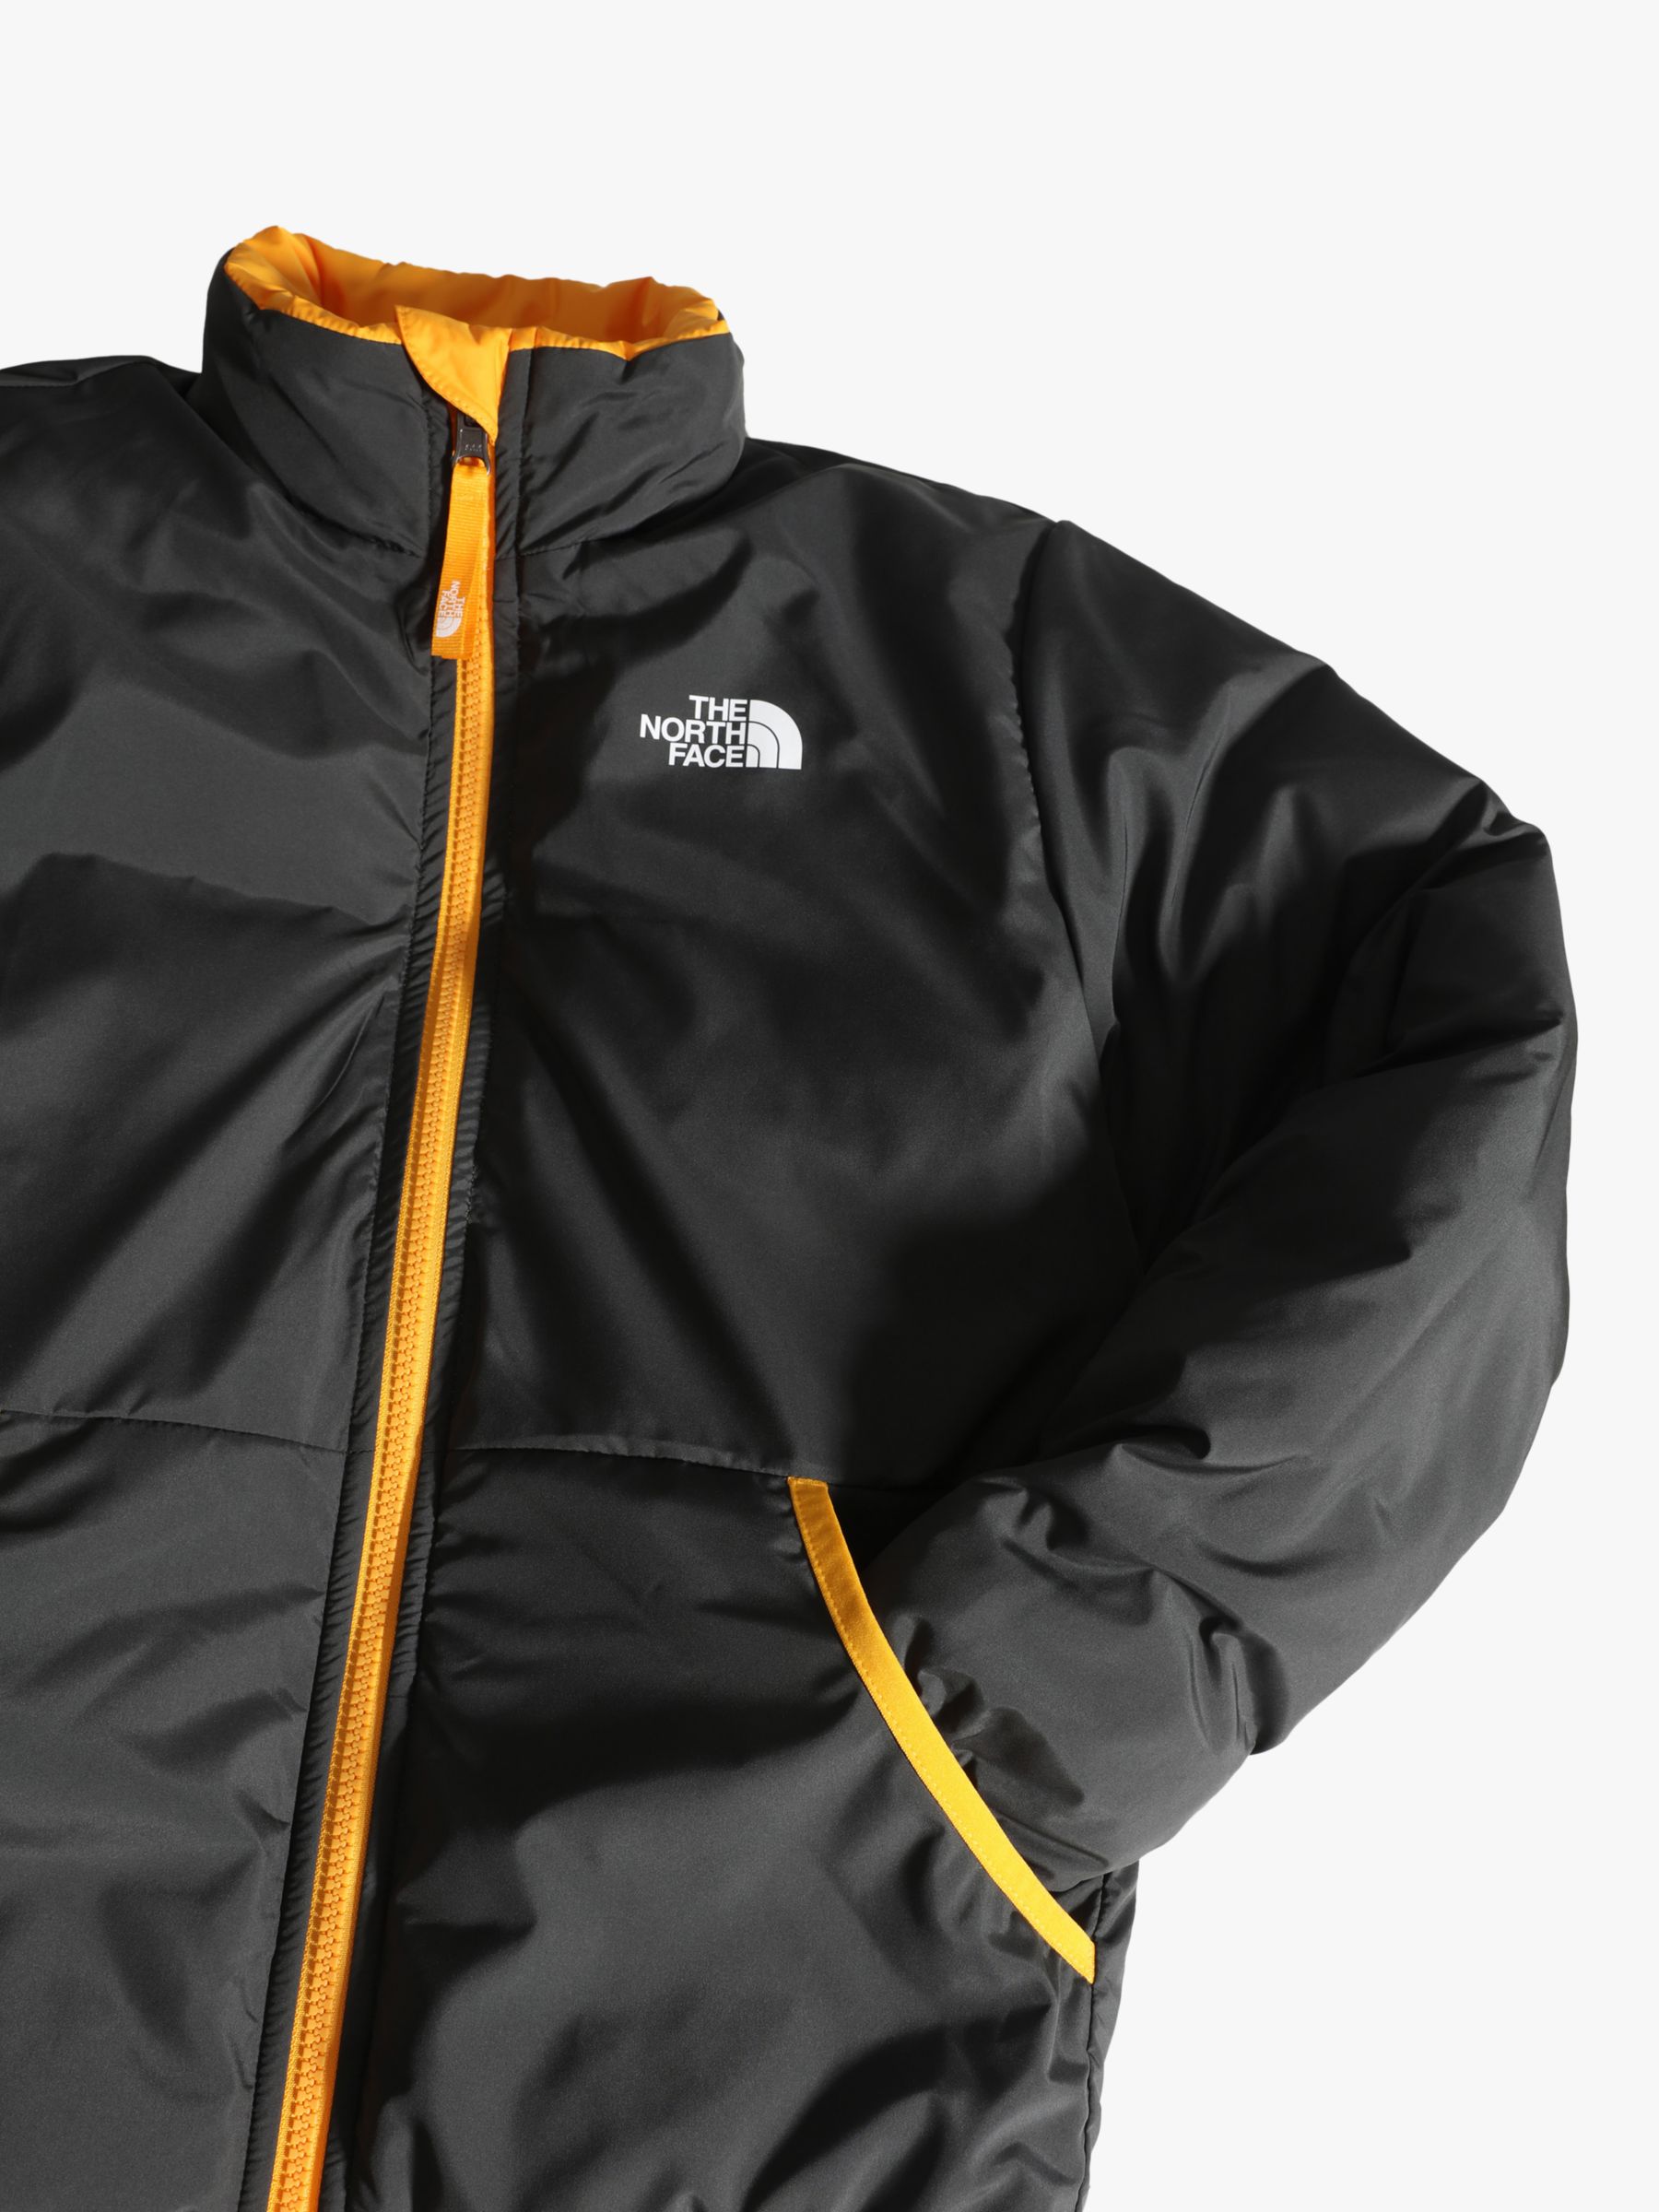 The North Face Boys' Reverse Andes Puffer Jacket, Yellow at John Lewis ...